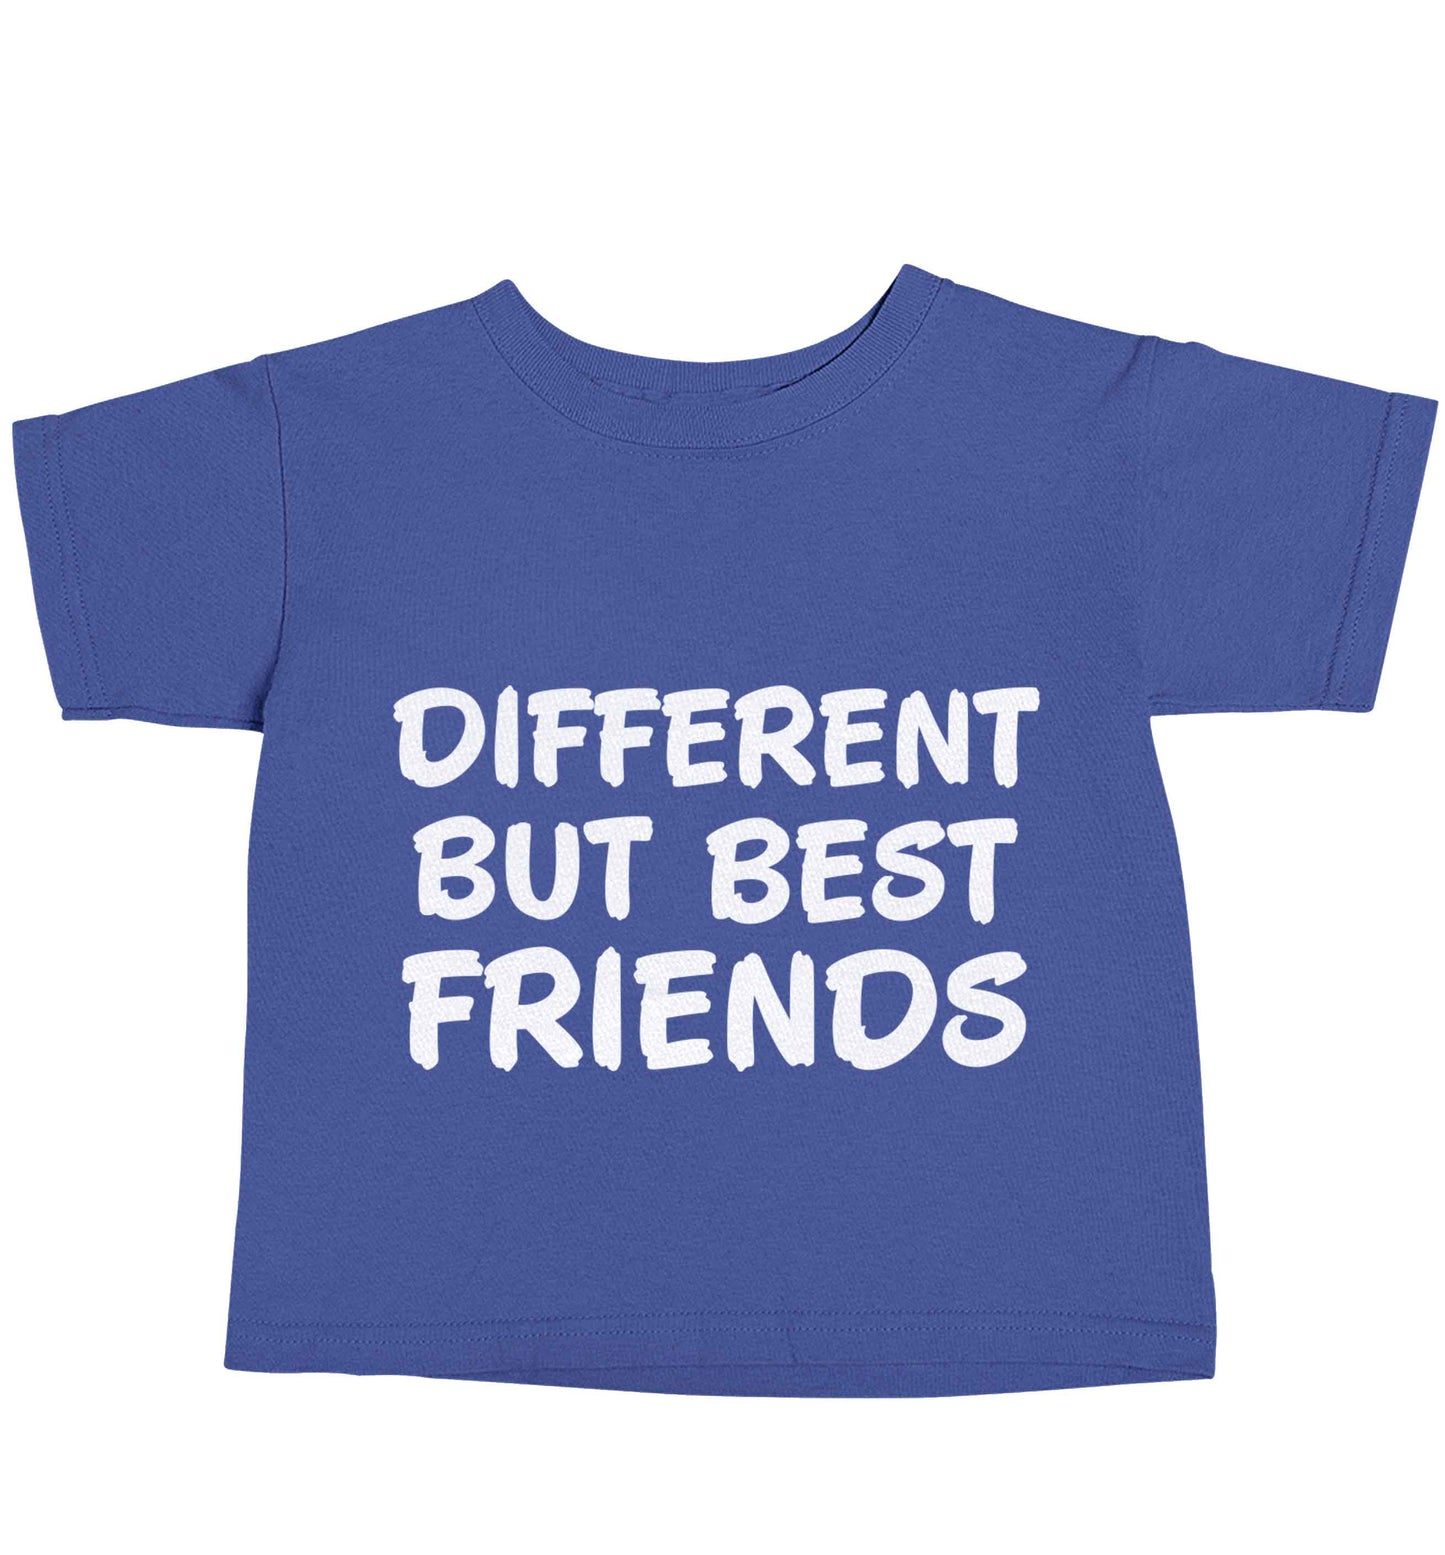 Different but best friends blue baby toddler Tshirt 2 Years